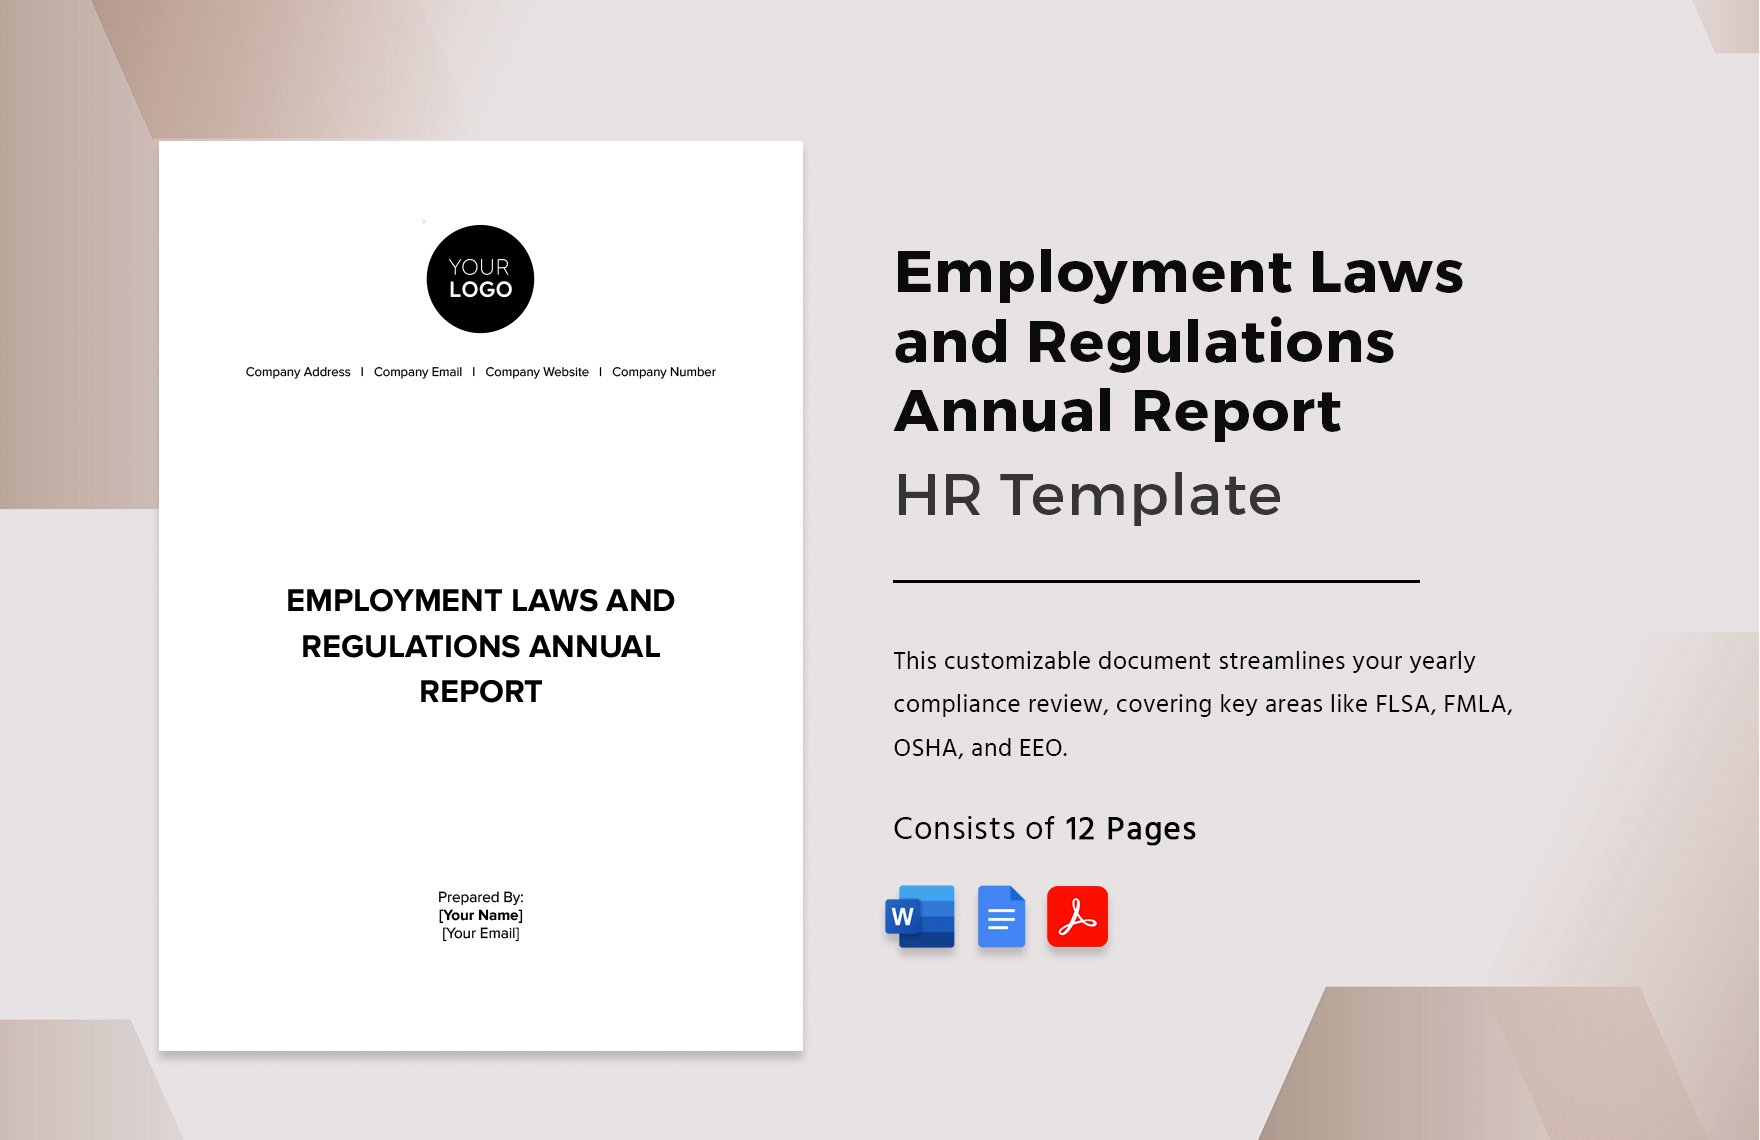 Employment Laws and Regulations Annual Report HR Template